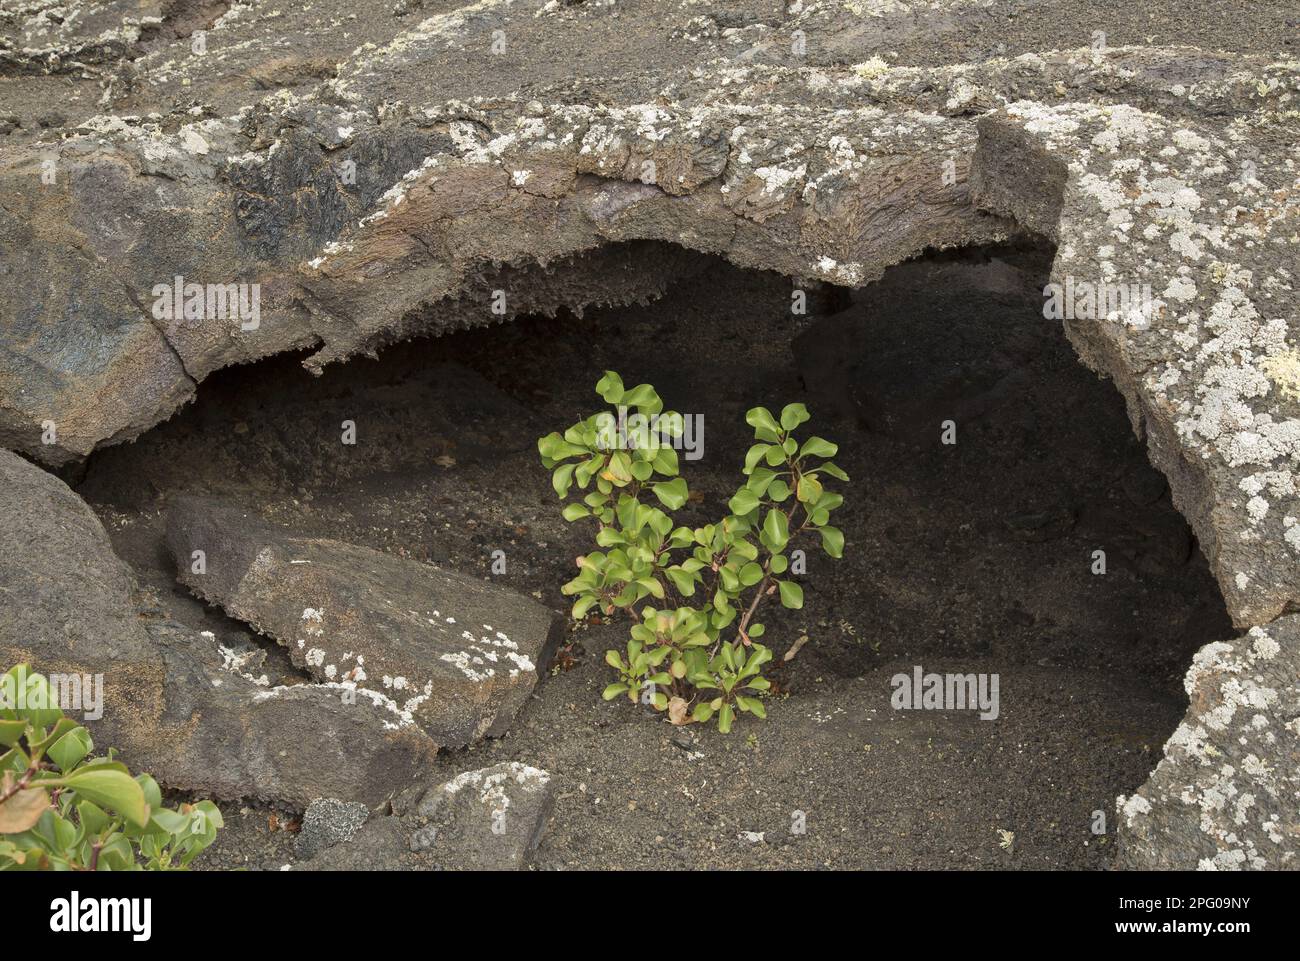 Canary sorrel (Rumex lunaria) habit, growing on cinders in the lava tunnel, Timanfaya N. P. Lanzarote, Canary Islands Stock Photo